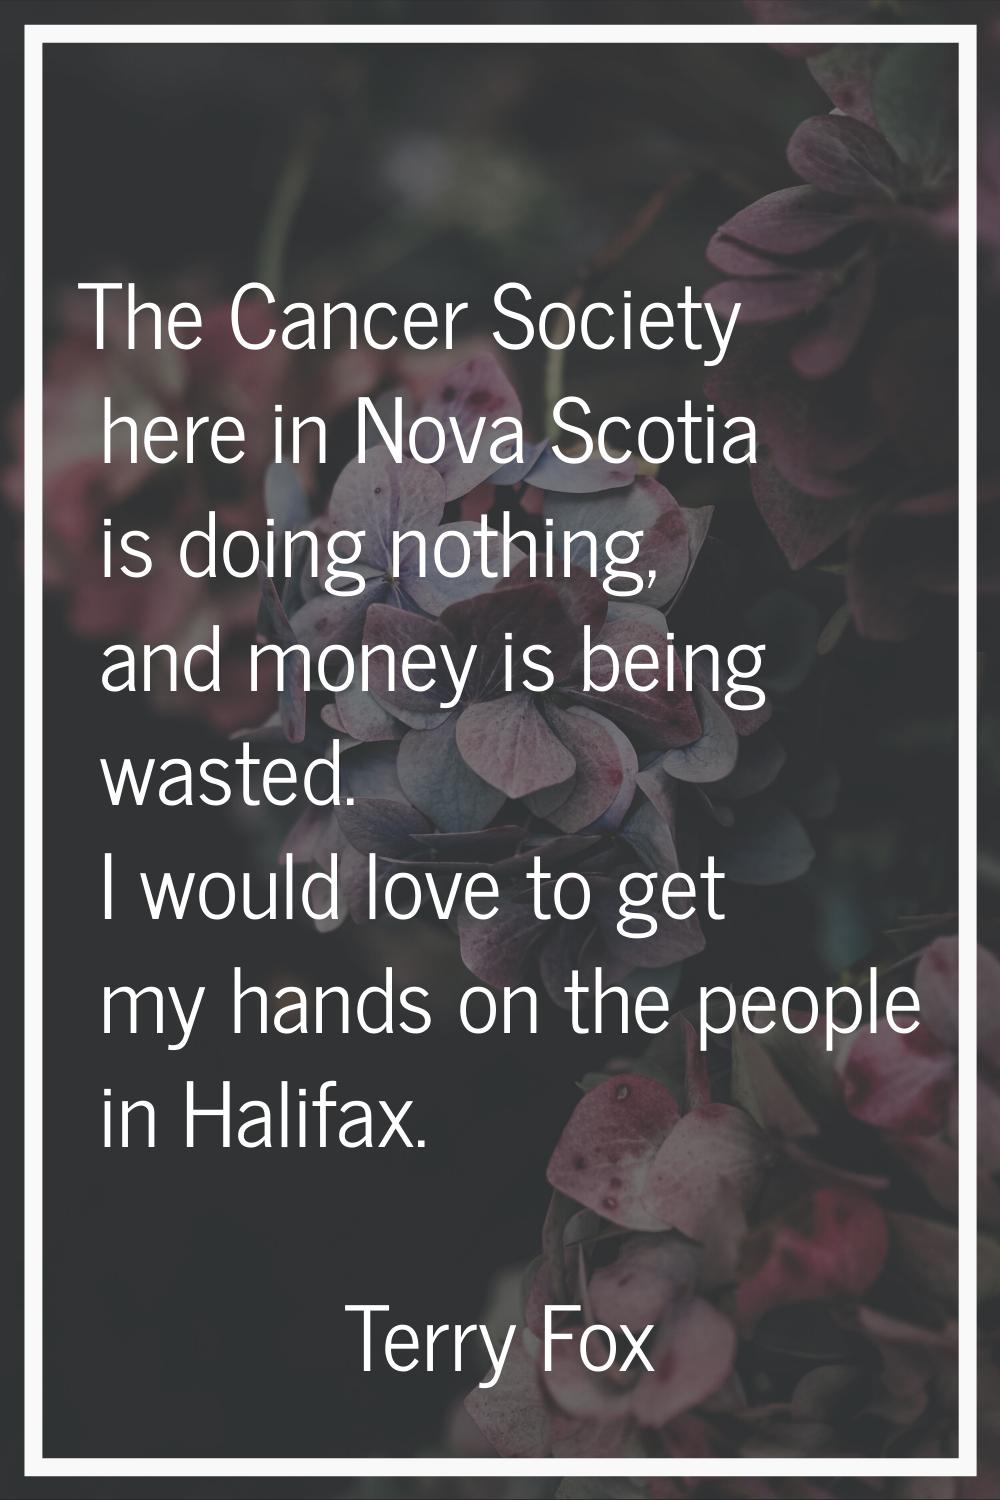 The Cancer Society here in Nova Scotia is doing nothing, and money is being wasted. I would love to